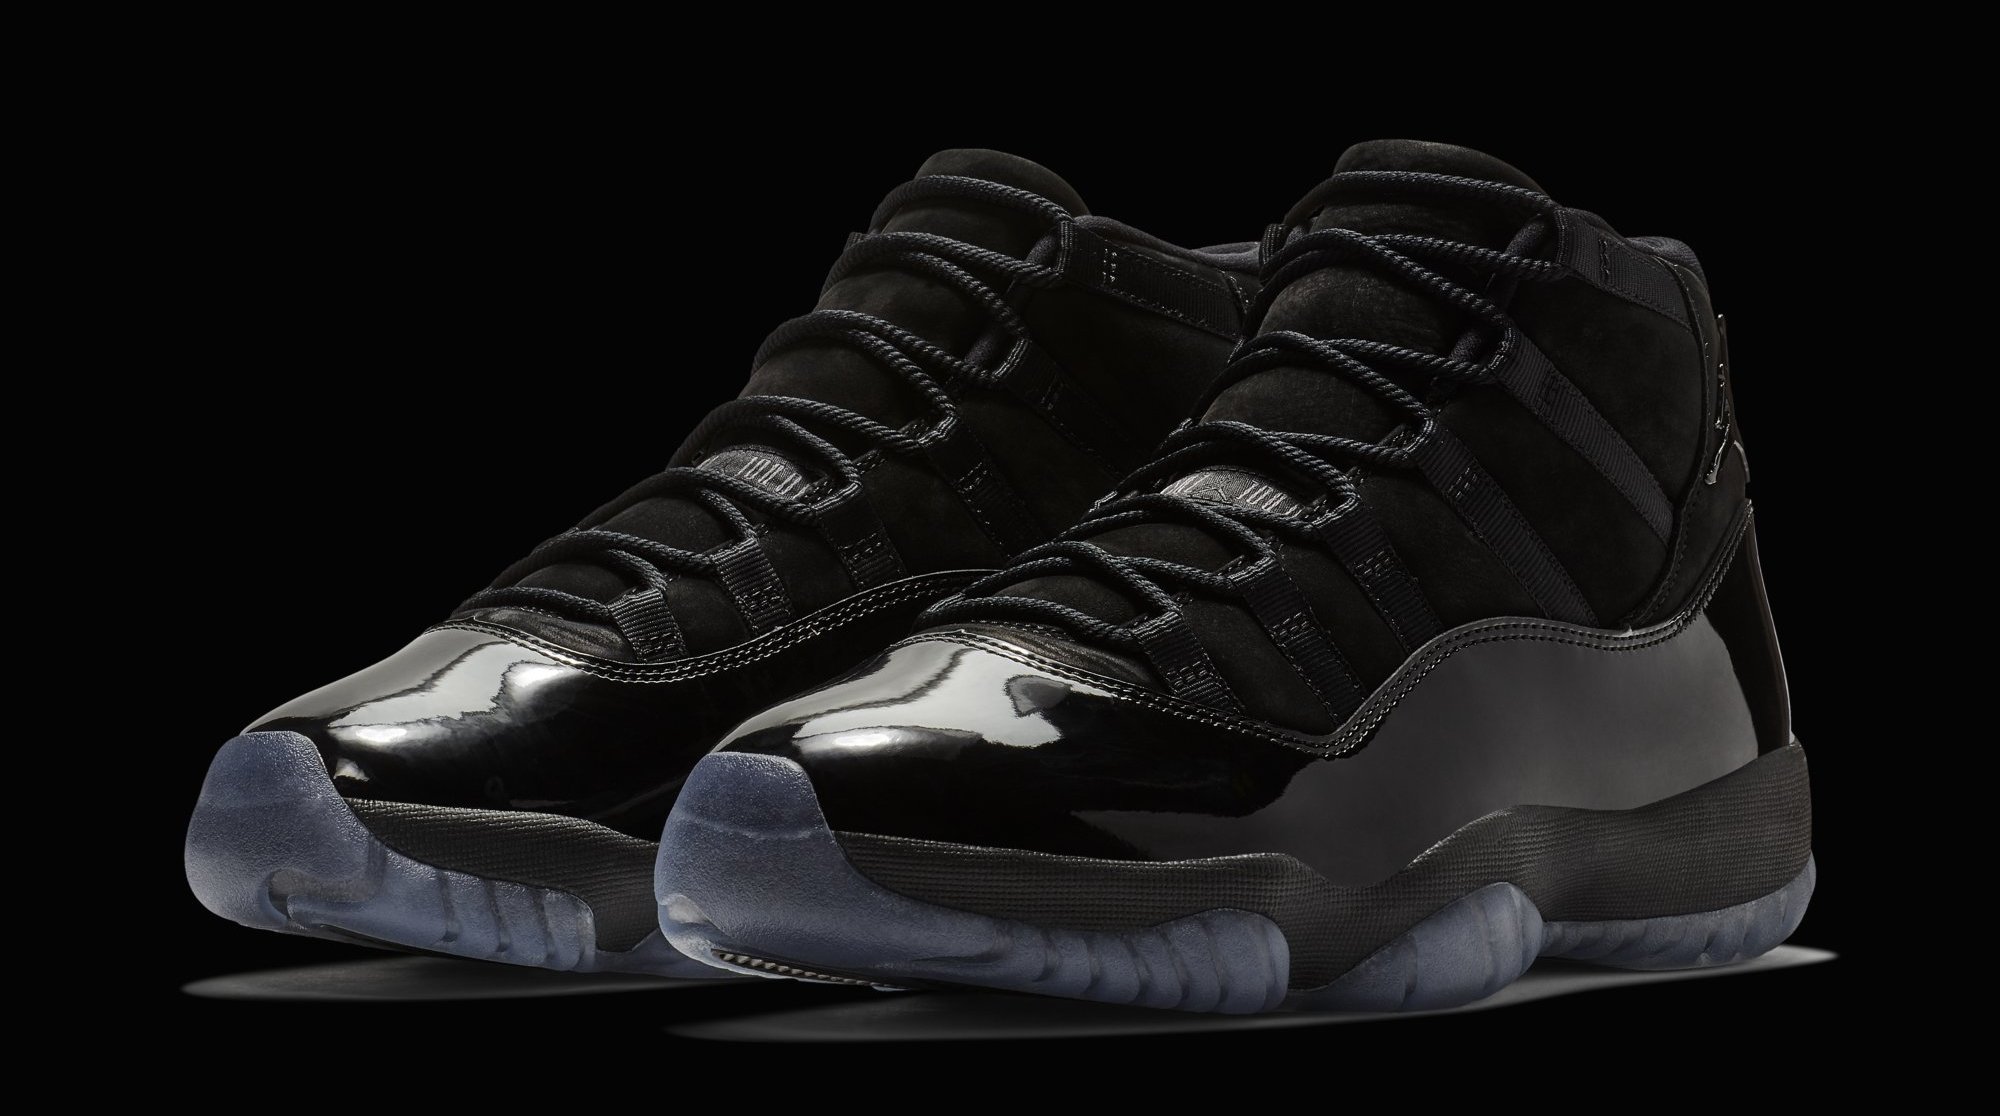 Air Jordan 11 Retro 'Cap and Gown' SNKRS Early Access | Sole Collector